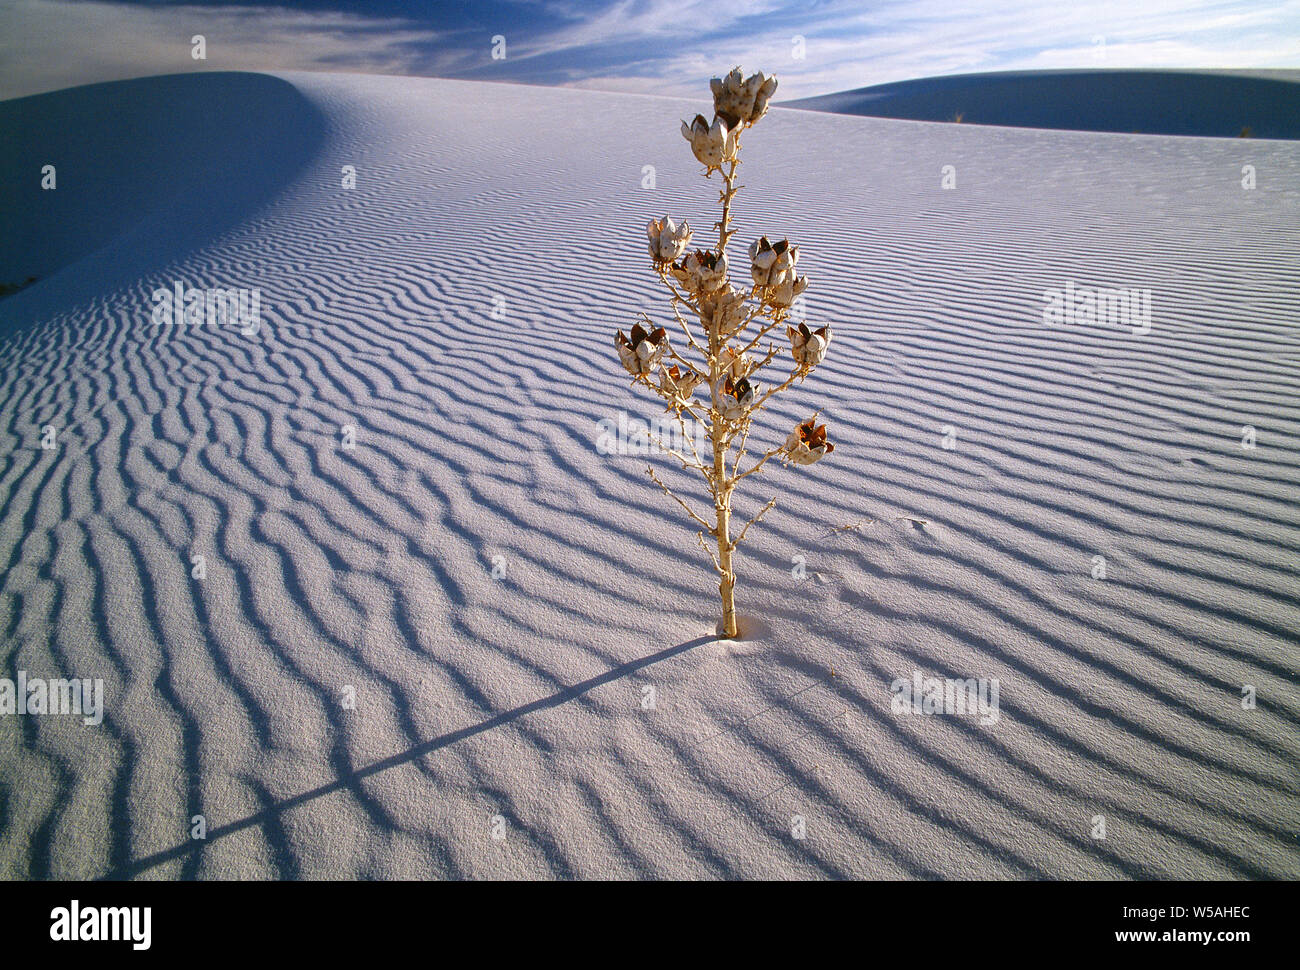 USA. New Mexico. White Sands National Monument. Dry Soaptree yucca plant in desert sand dune. Stock Photo